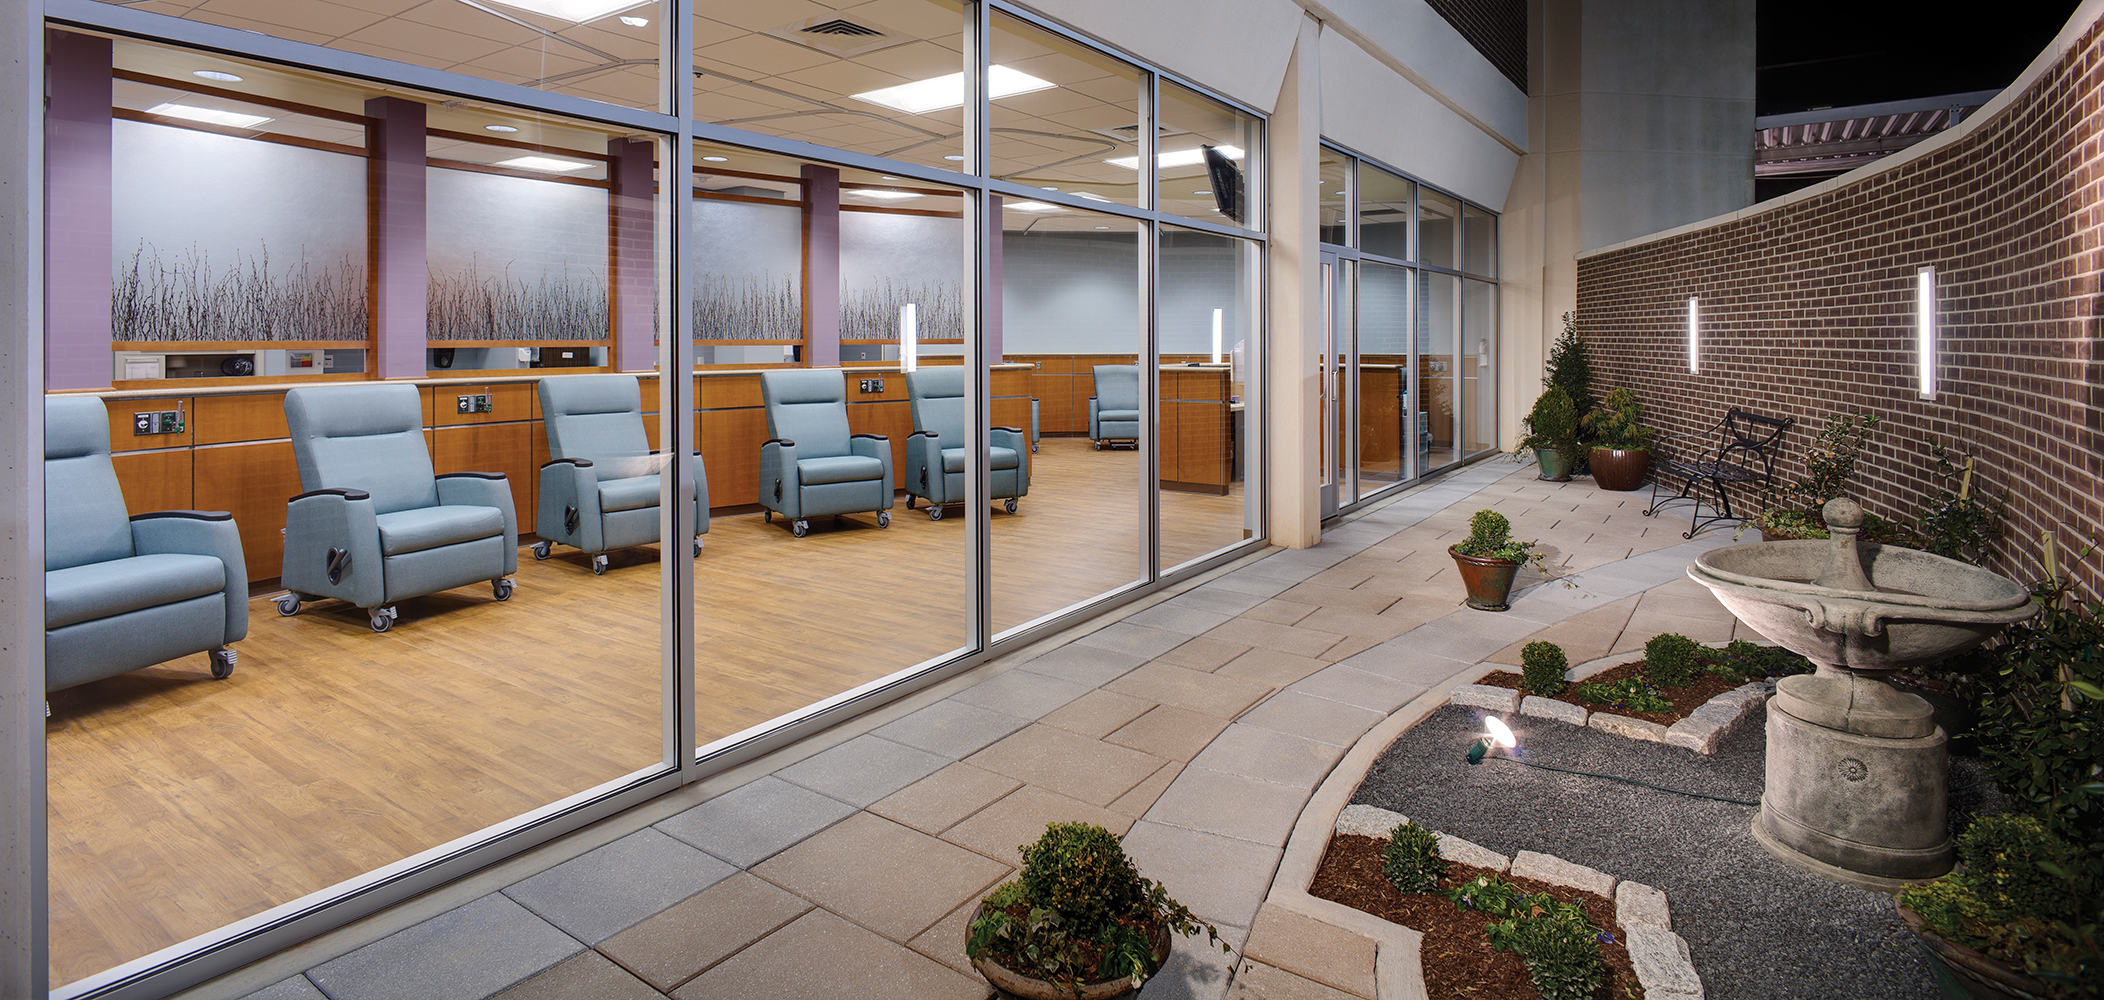 Visage outdoor light fixtures illuminate a medical facility terrace outside a patient seating area.